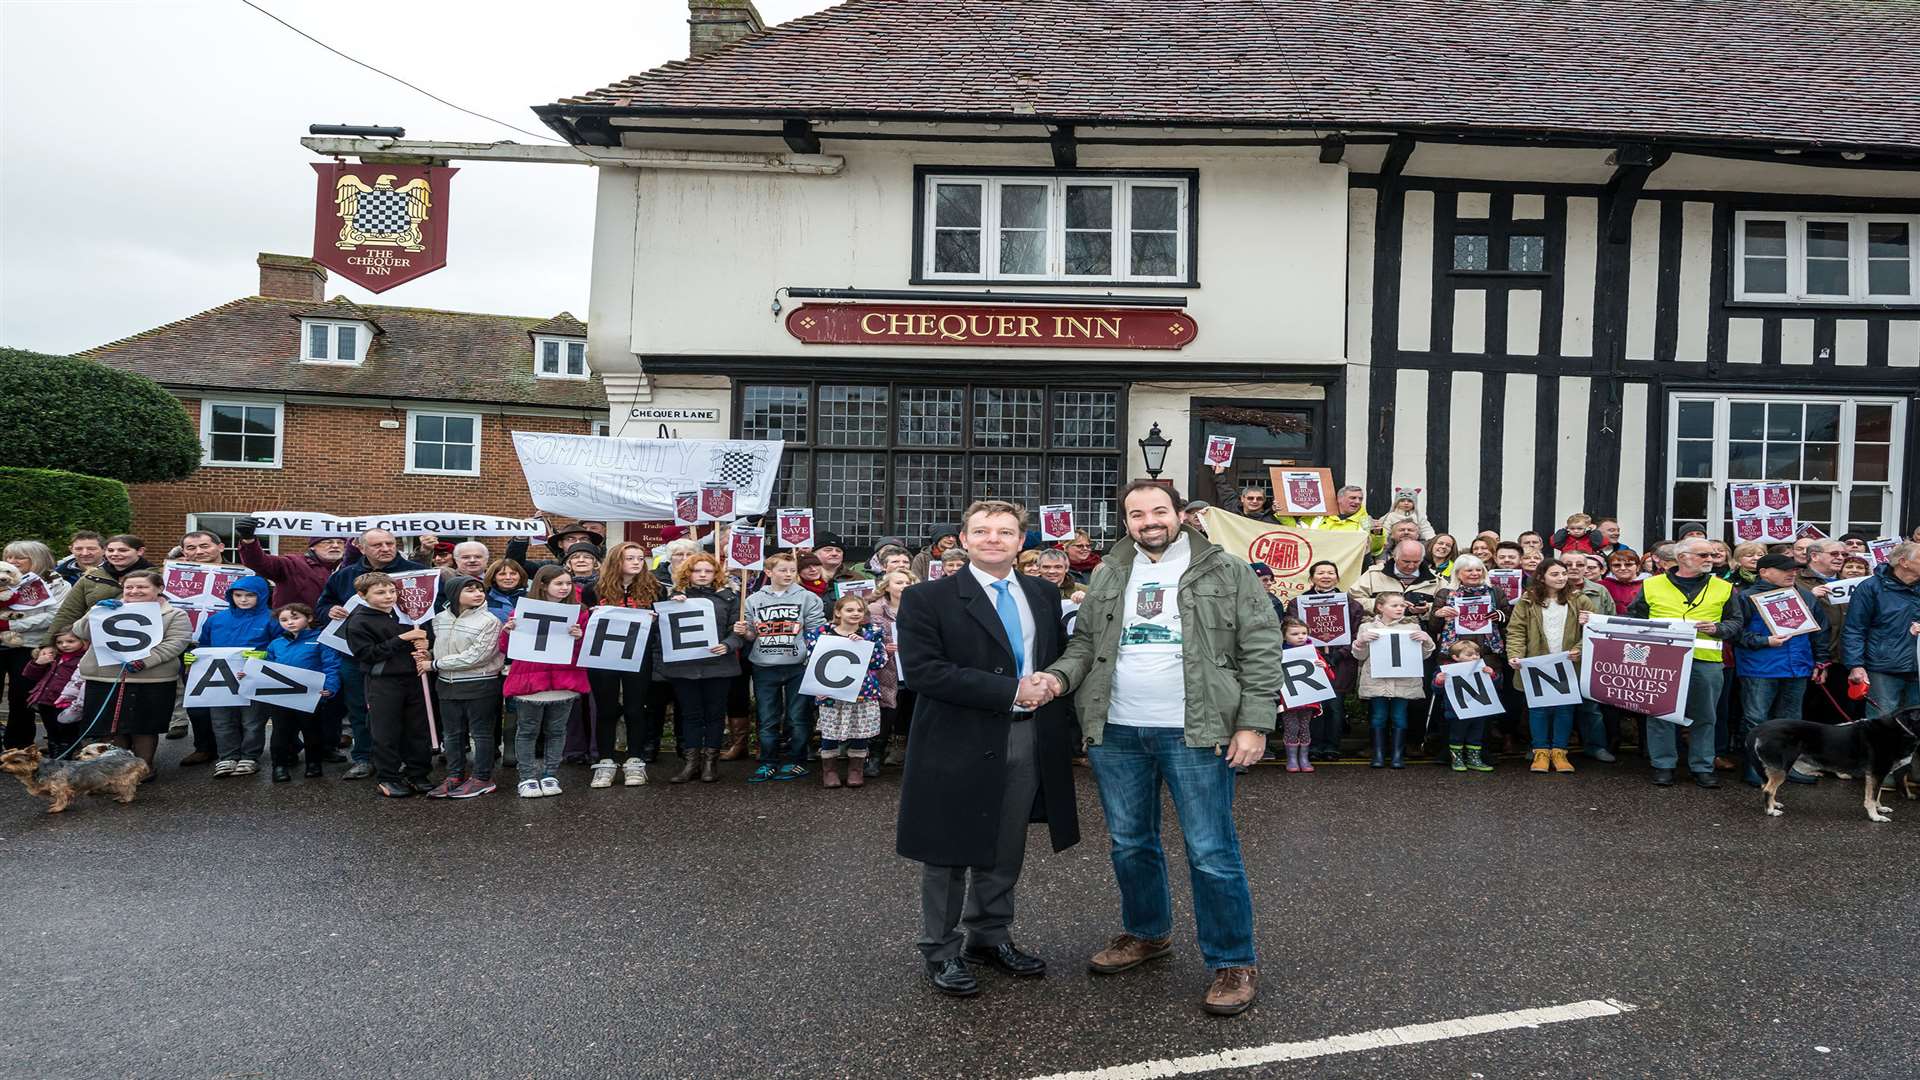 Campaigners outside the Chequer Inn in Ash, which they would like to keep as a pub